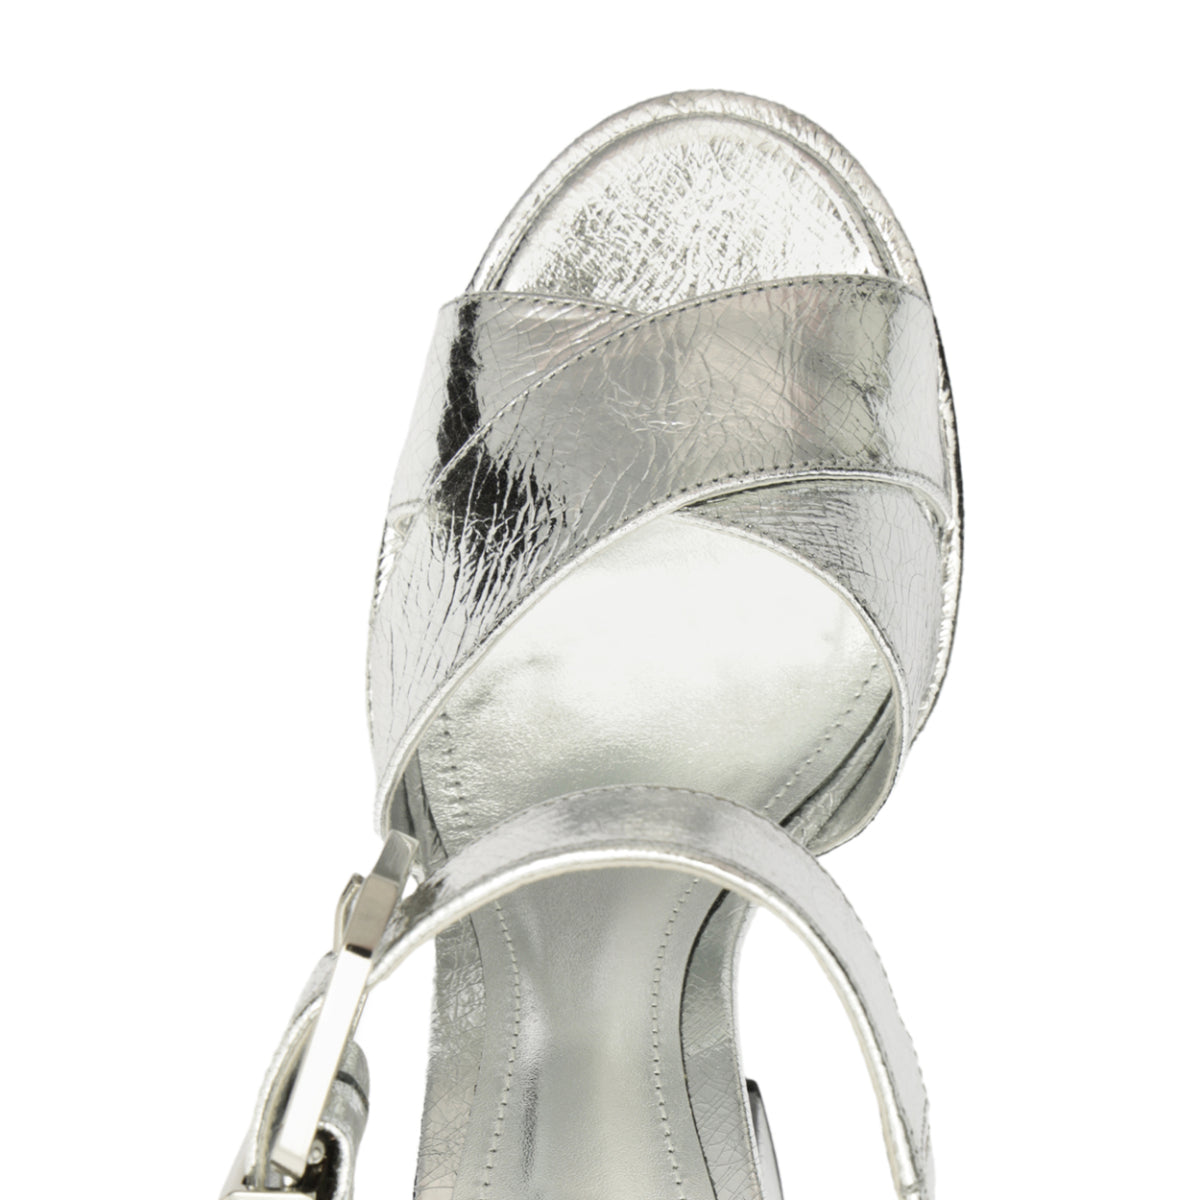 Penelope Leather Sandal in Silver